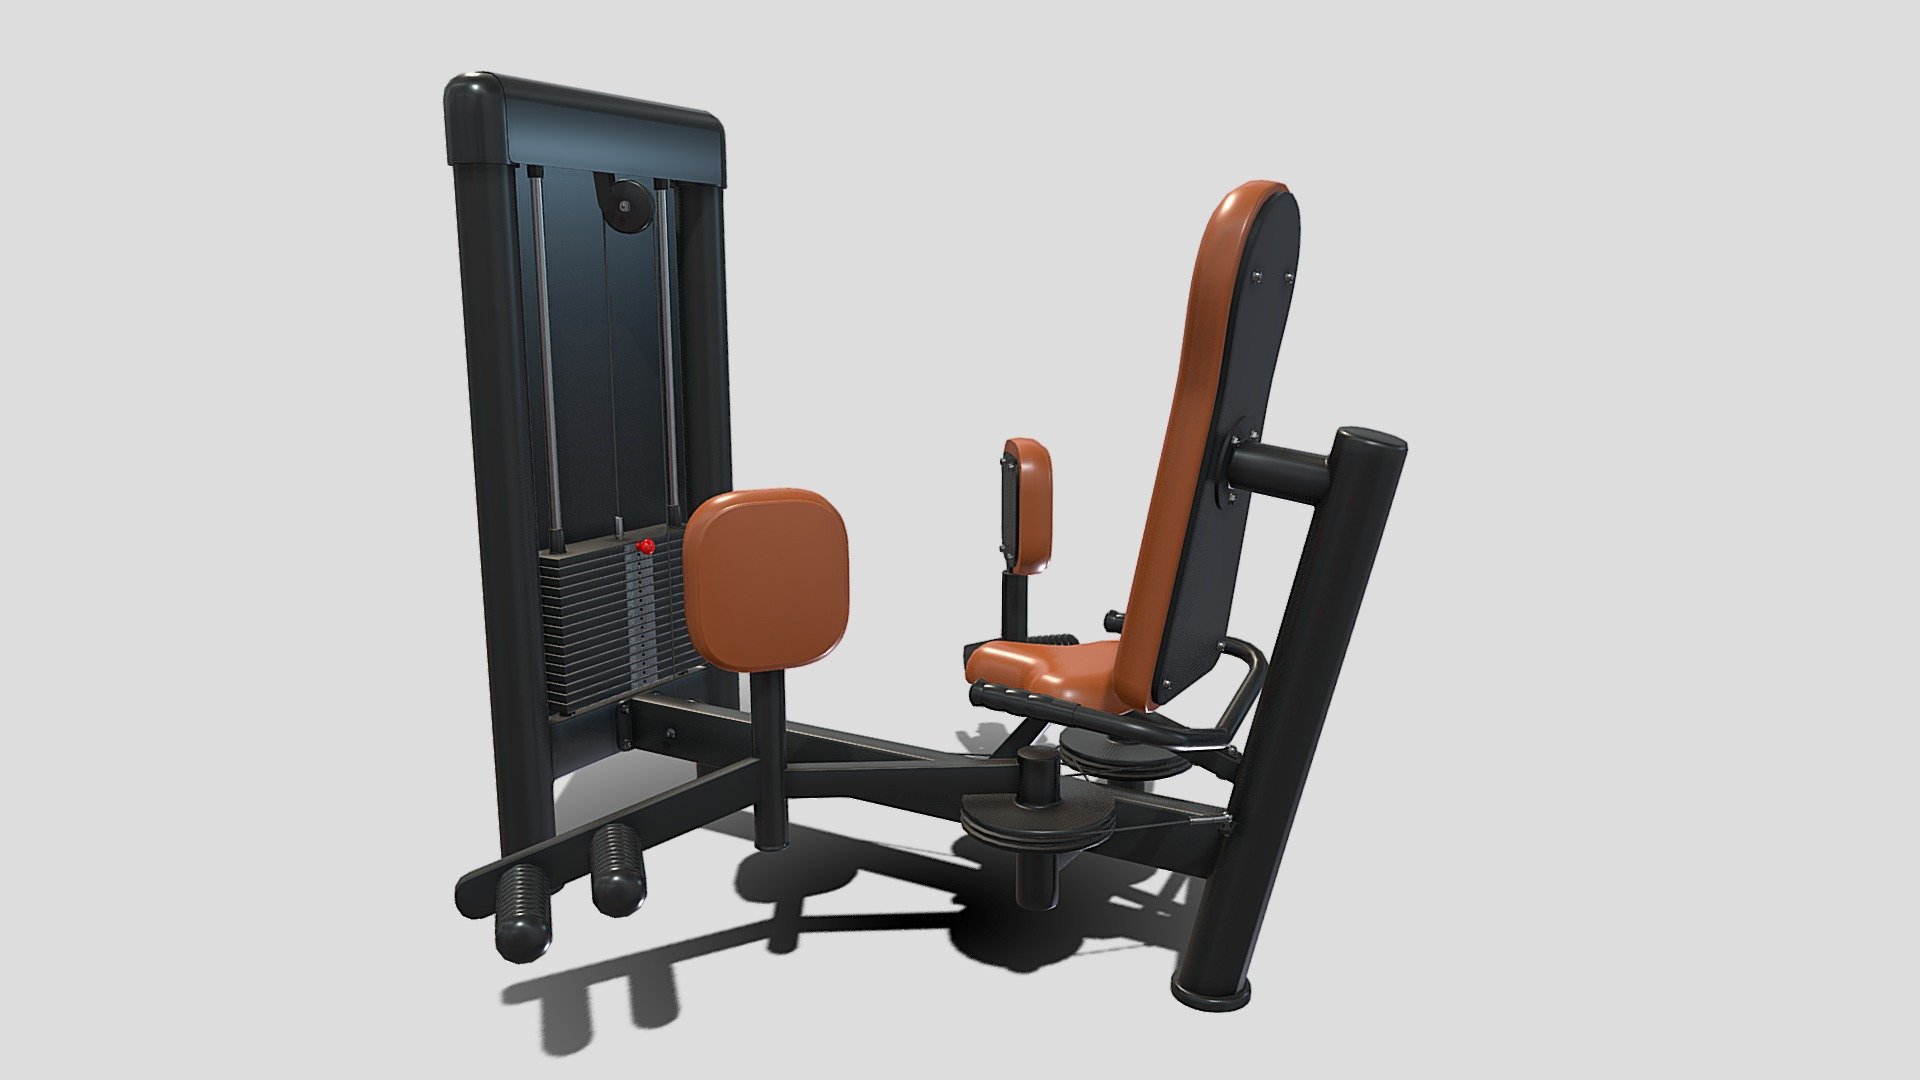 Gym machine 3d model built to real size, rendered with Cycles in Blender, as per seen on attached images. 

File formats:
-.blend, rendered with cycles, as seen in the images;
-.obj, with materials applied;
-.dae, with materials applied;
-.fbx, with materials applied;
-.stl;

Files come named appropriately and split by file format.

3D Software:
The 3D model was originally created in Blender 3.1 and rendered with Cycles.

Materials and textures:
The models have materials applied in all formats, and are ready to import and render.
Materials are image based using PBR, the model comes with four 4k png image textures.

Preview scenes:
The preview images are rendered in Blender using its built-in render engine &lsquo;Cycles'.
Note that the blend files come directly with the rendering scene included and the render command will generate the exact result as seen in previews.

General:
The models are built mostly out of quads.

For any problems please feel free to contact me.

Don't forget to rate and enjoy! - Adductor Machine - Buy Royalty Free 3D model by dragosburian 3d model